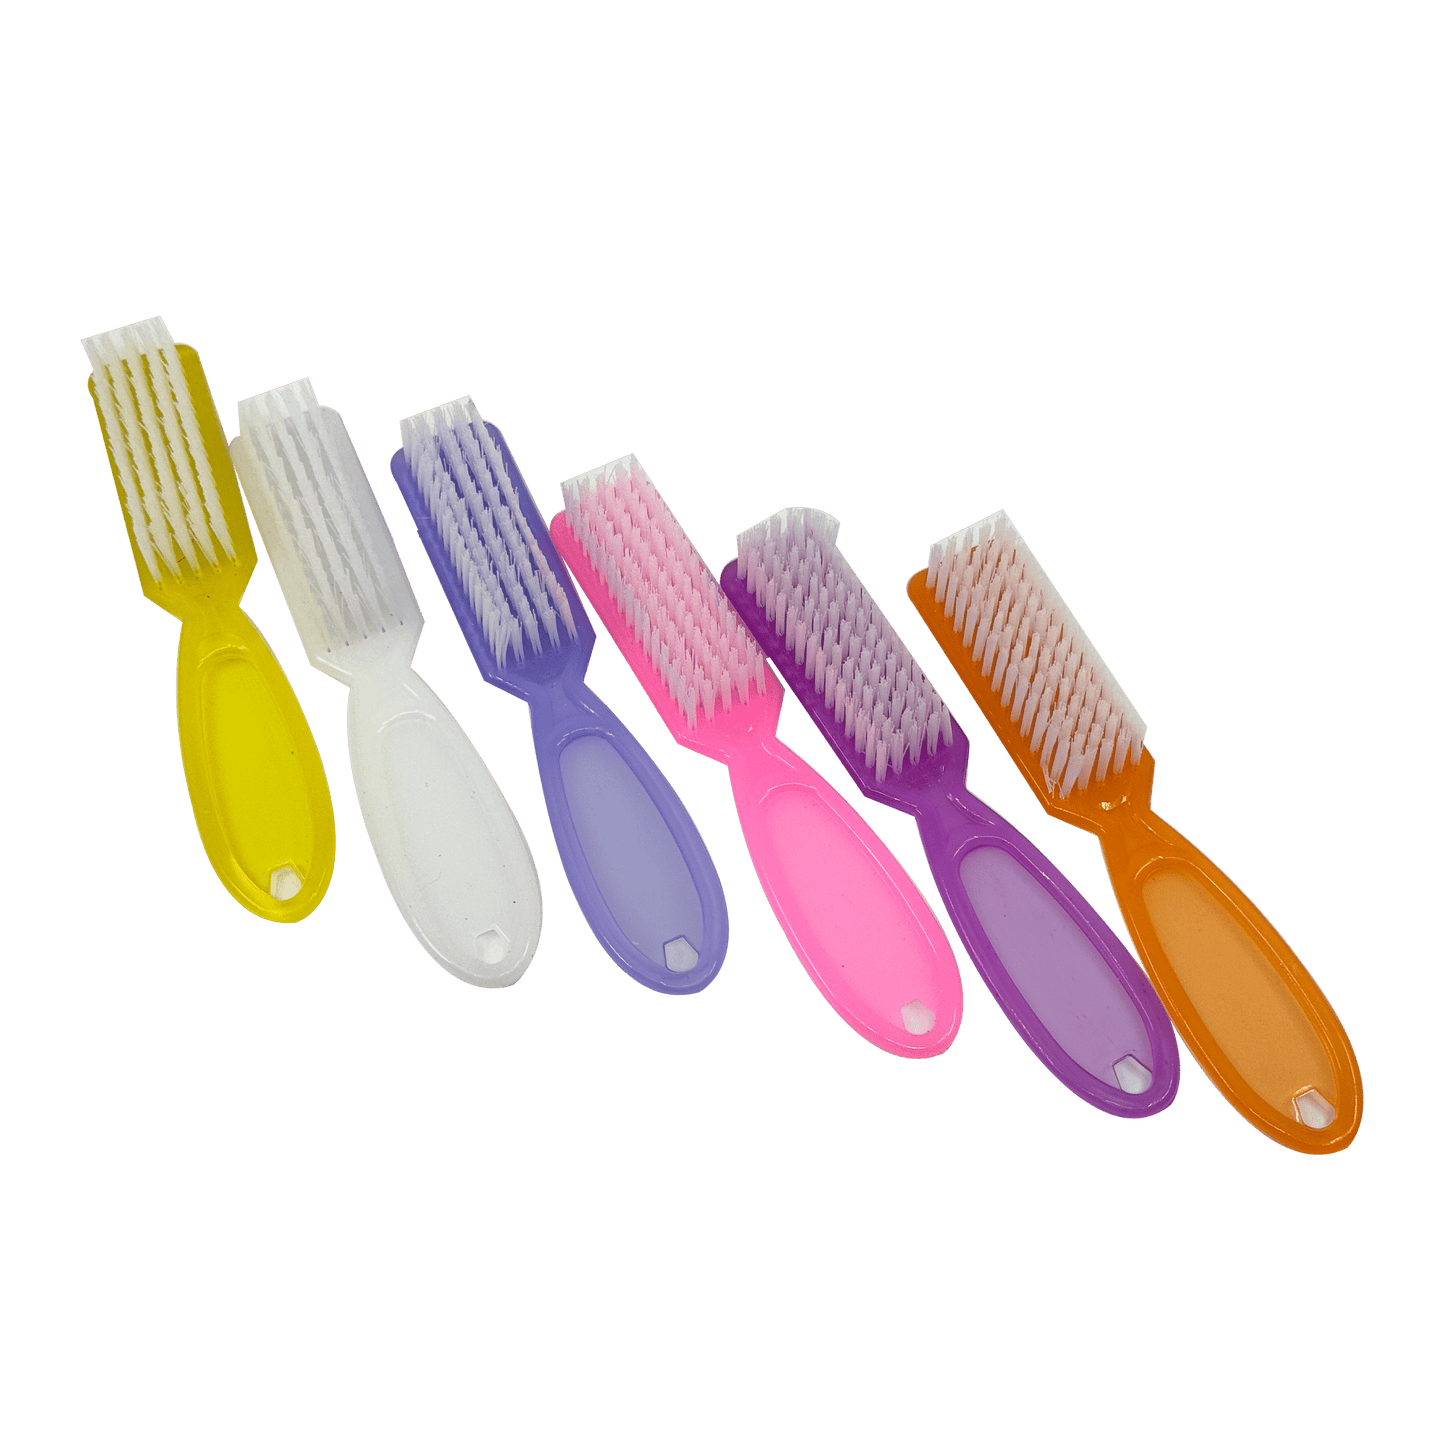 Manicure Brushes - W.S. Industries, Inc.